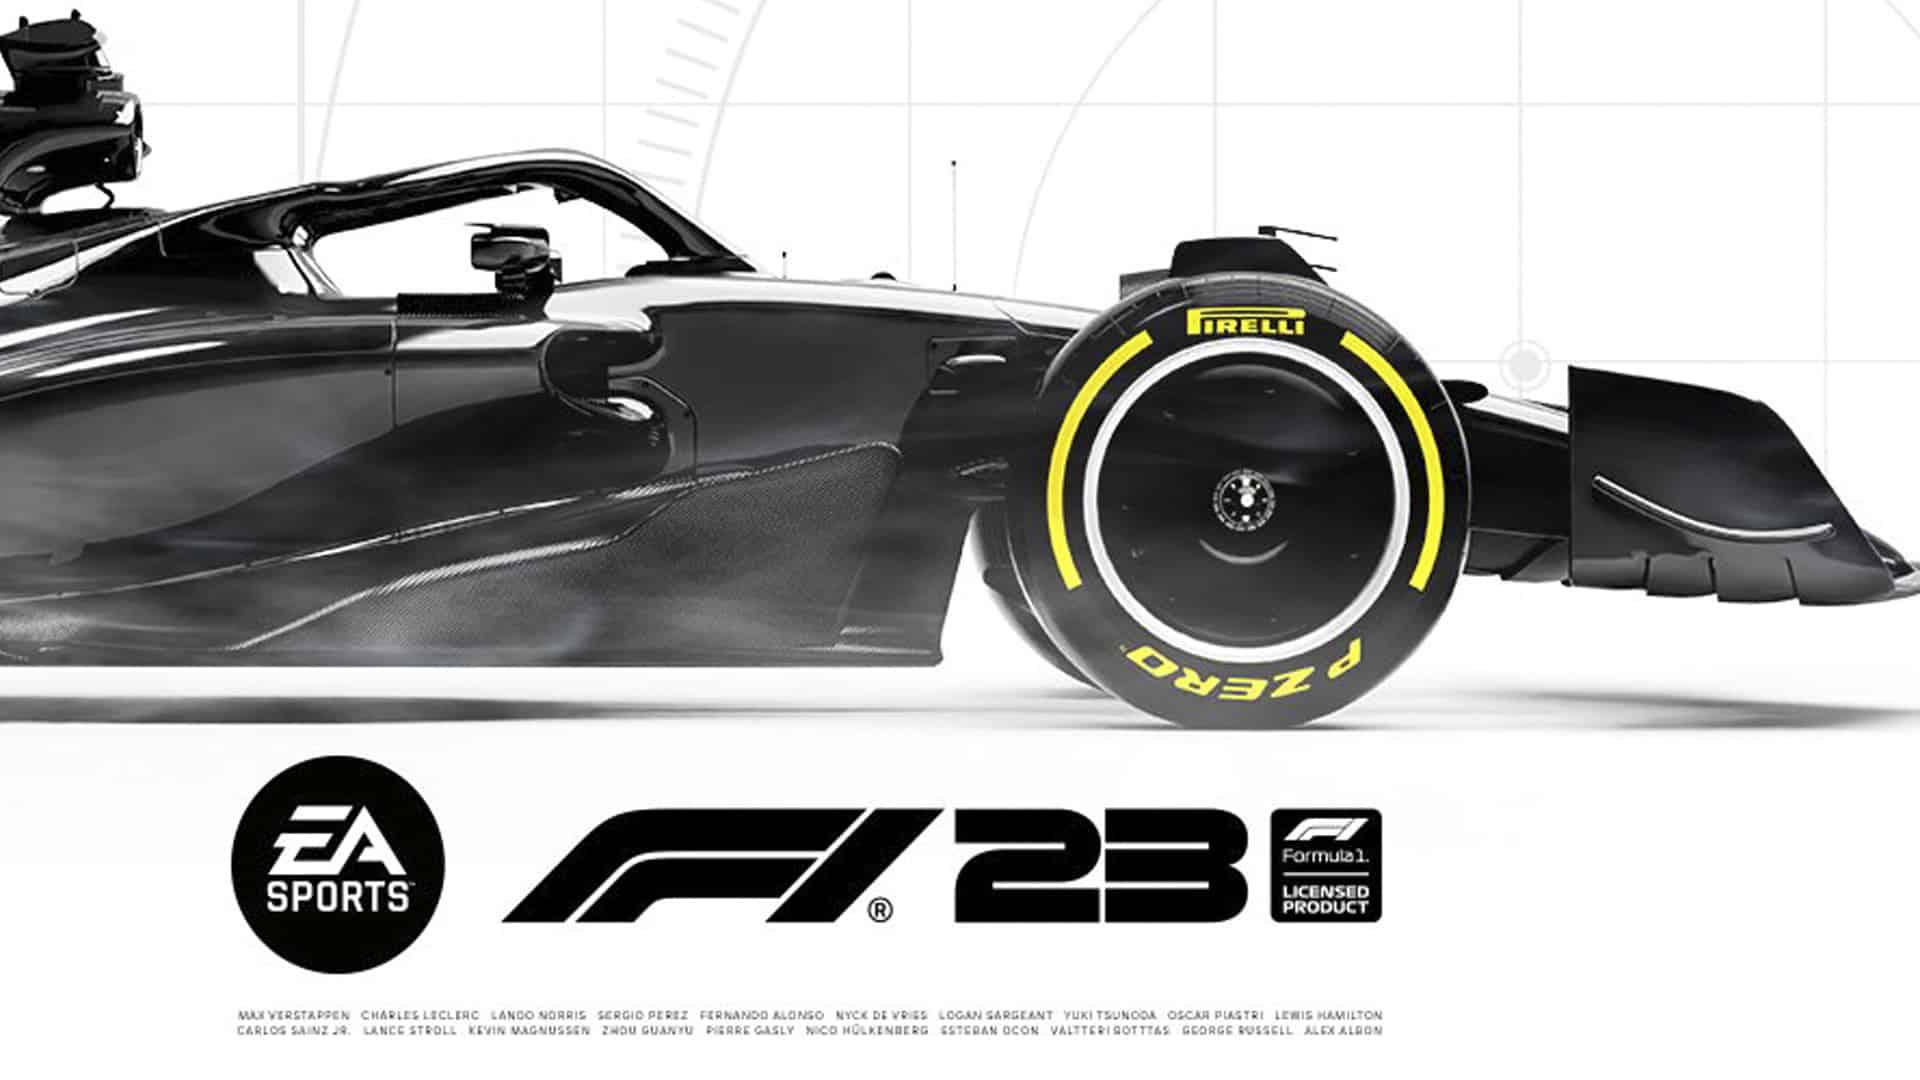 Traxion SPORTS called 23 will be EA F1 23 EA | F1 SPORTS